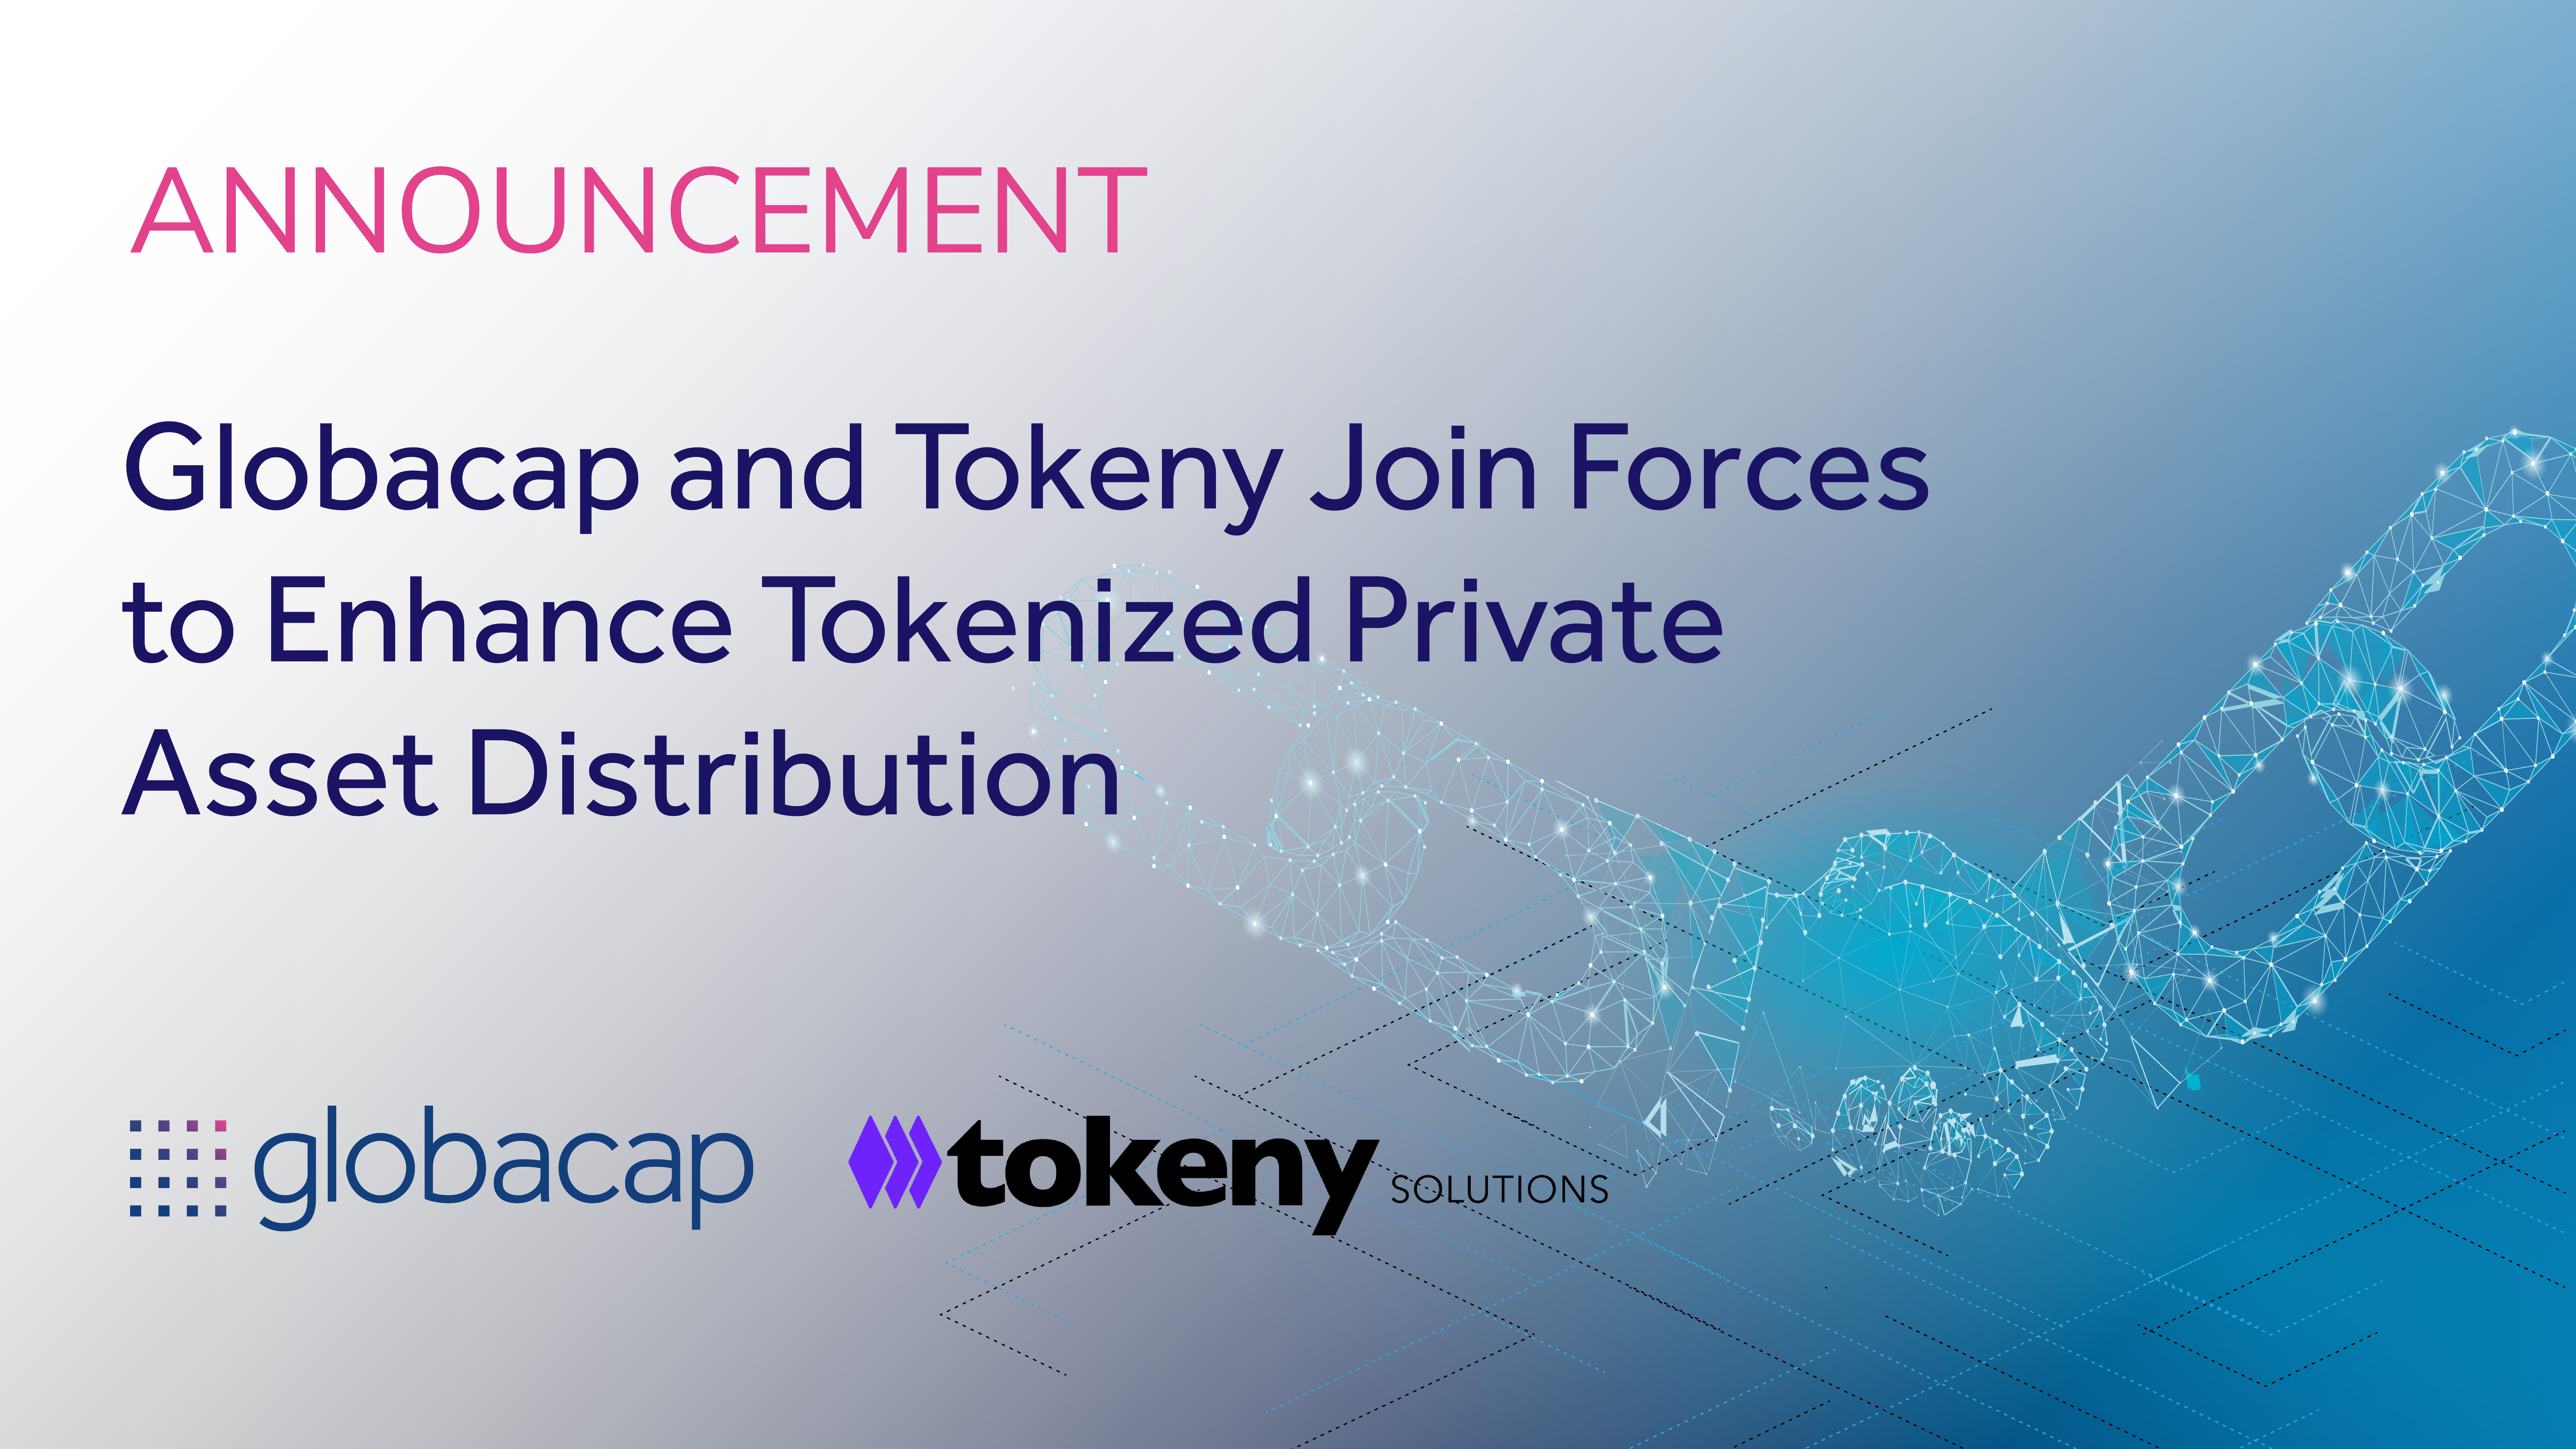 Globacap and Tokeny join forces